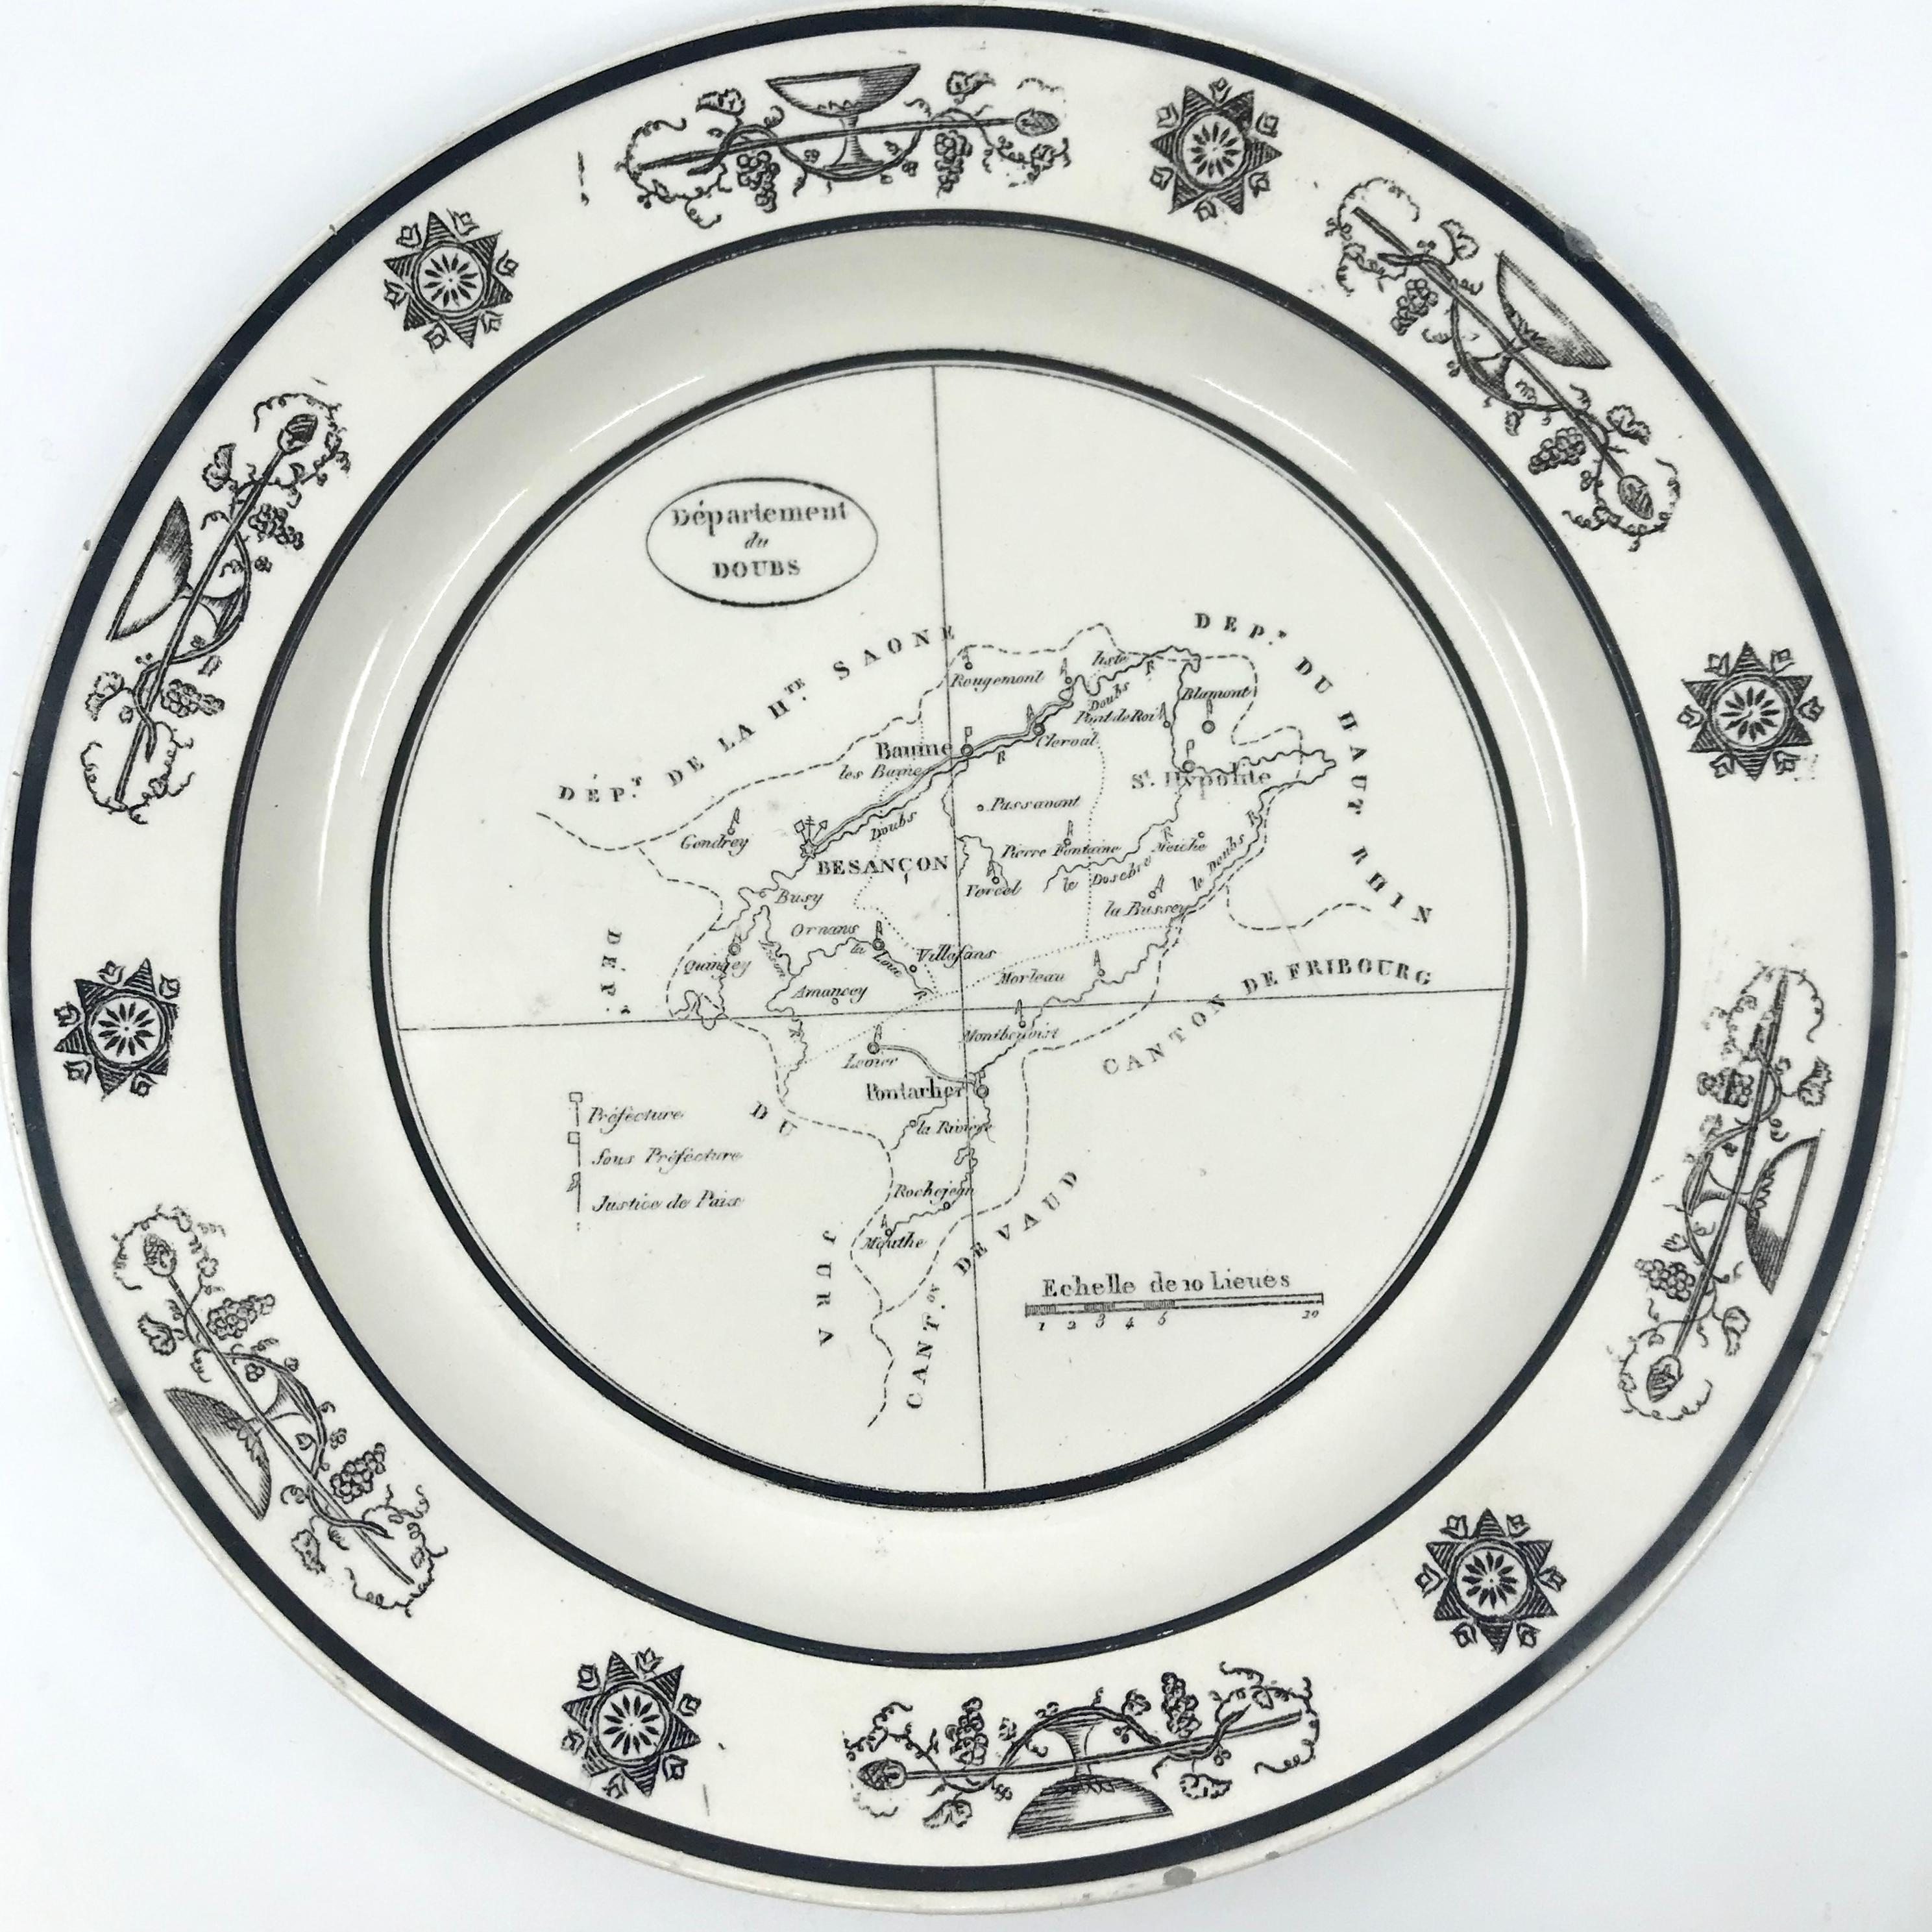 Pair of neoclassical transfer printed creamware plates with departmental maps of two regions in France, Doubs and the Haute Pyrenees. Impressed mark for Choisy Le Roi. France, first quarter 19th century.
Dimensions: 8.5